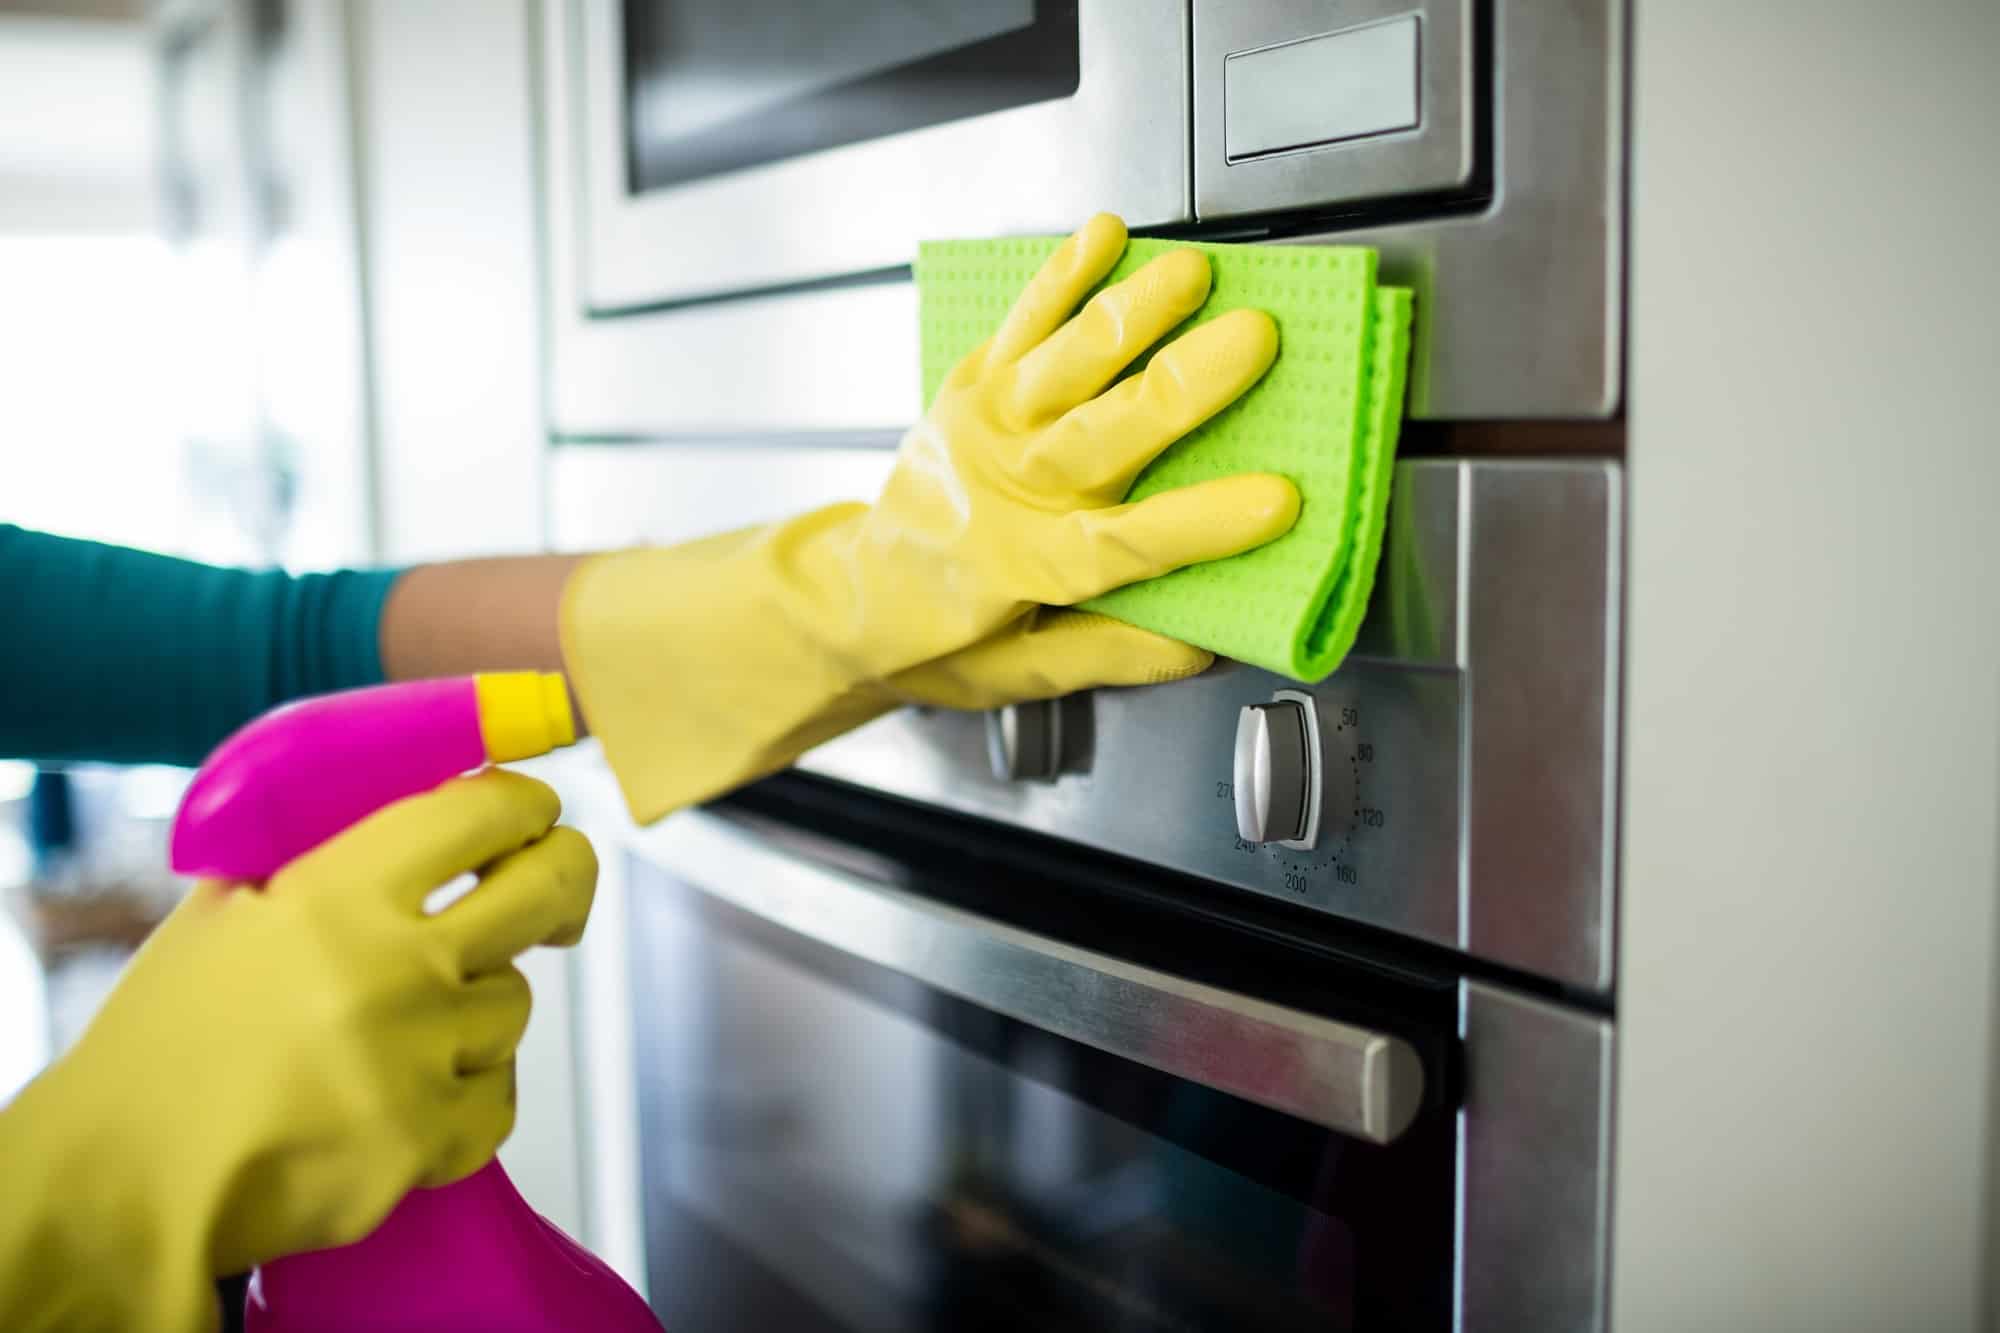 A pair of hands with yellow gloves on spraying and wiping down the stainless steel exterior of the oven and microwave.